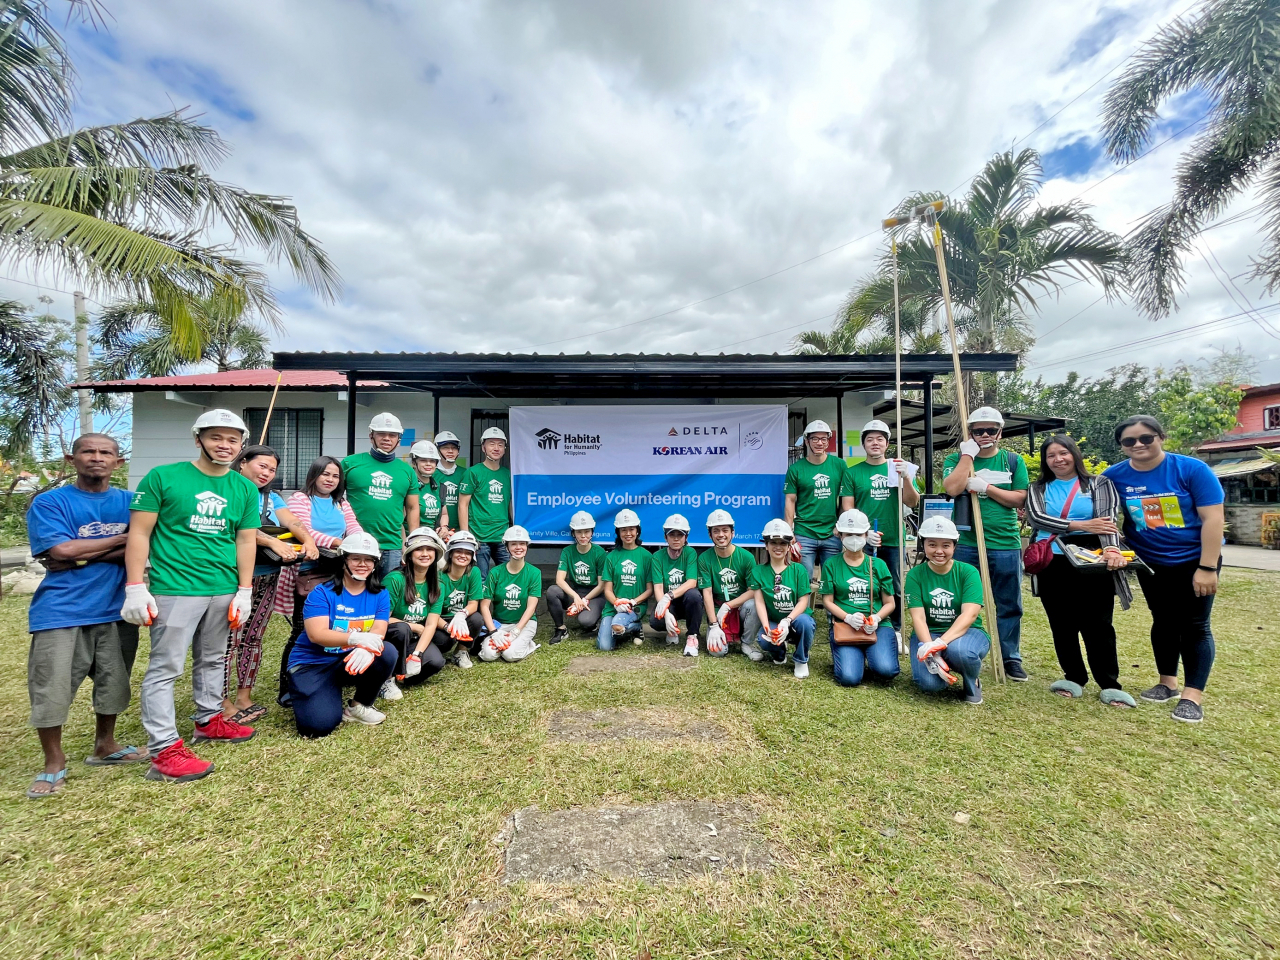 Employees from Korean Air, Delta Air Lines and Habitat for Humanity Philippines pose for a photo after a home repairing event in Calauan, the Philippines, on March 17. (Korean Air)